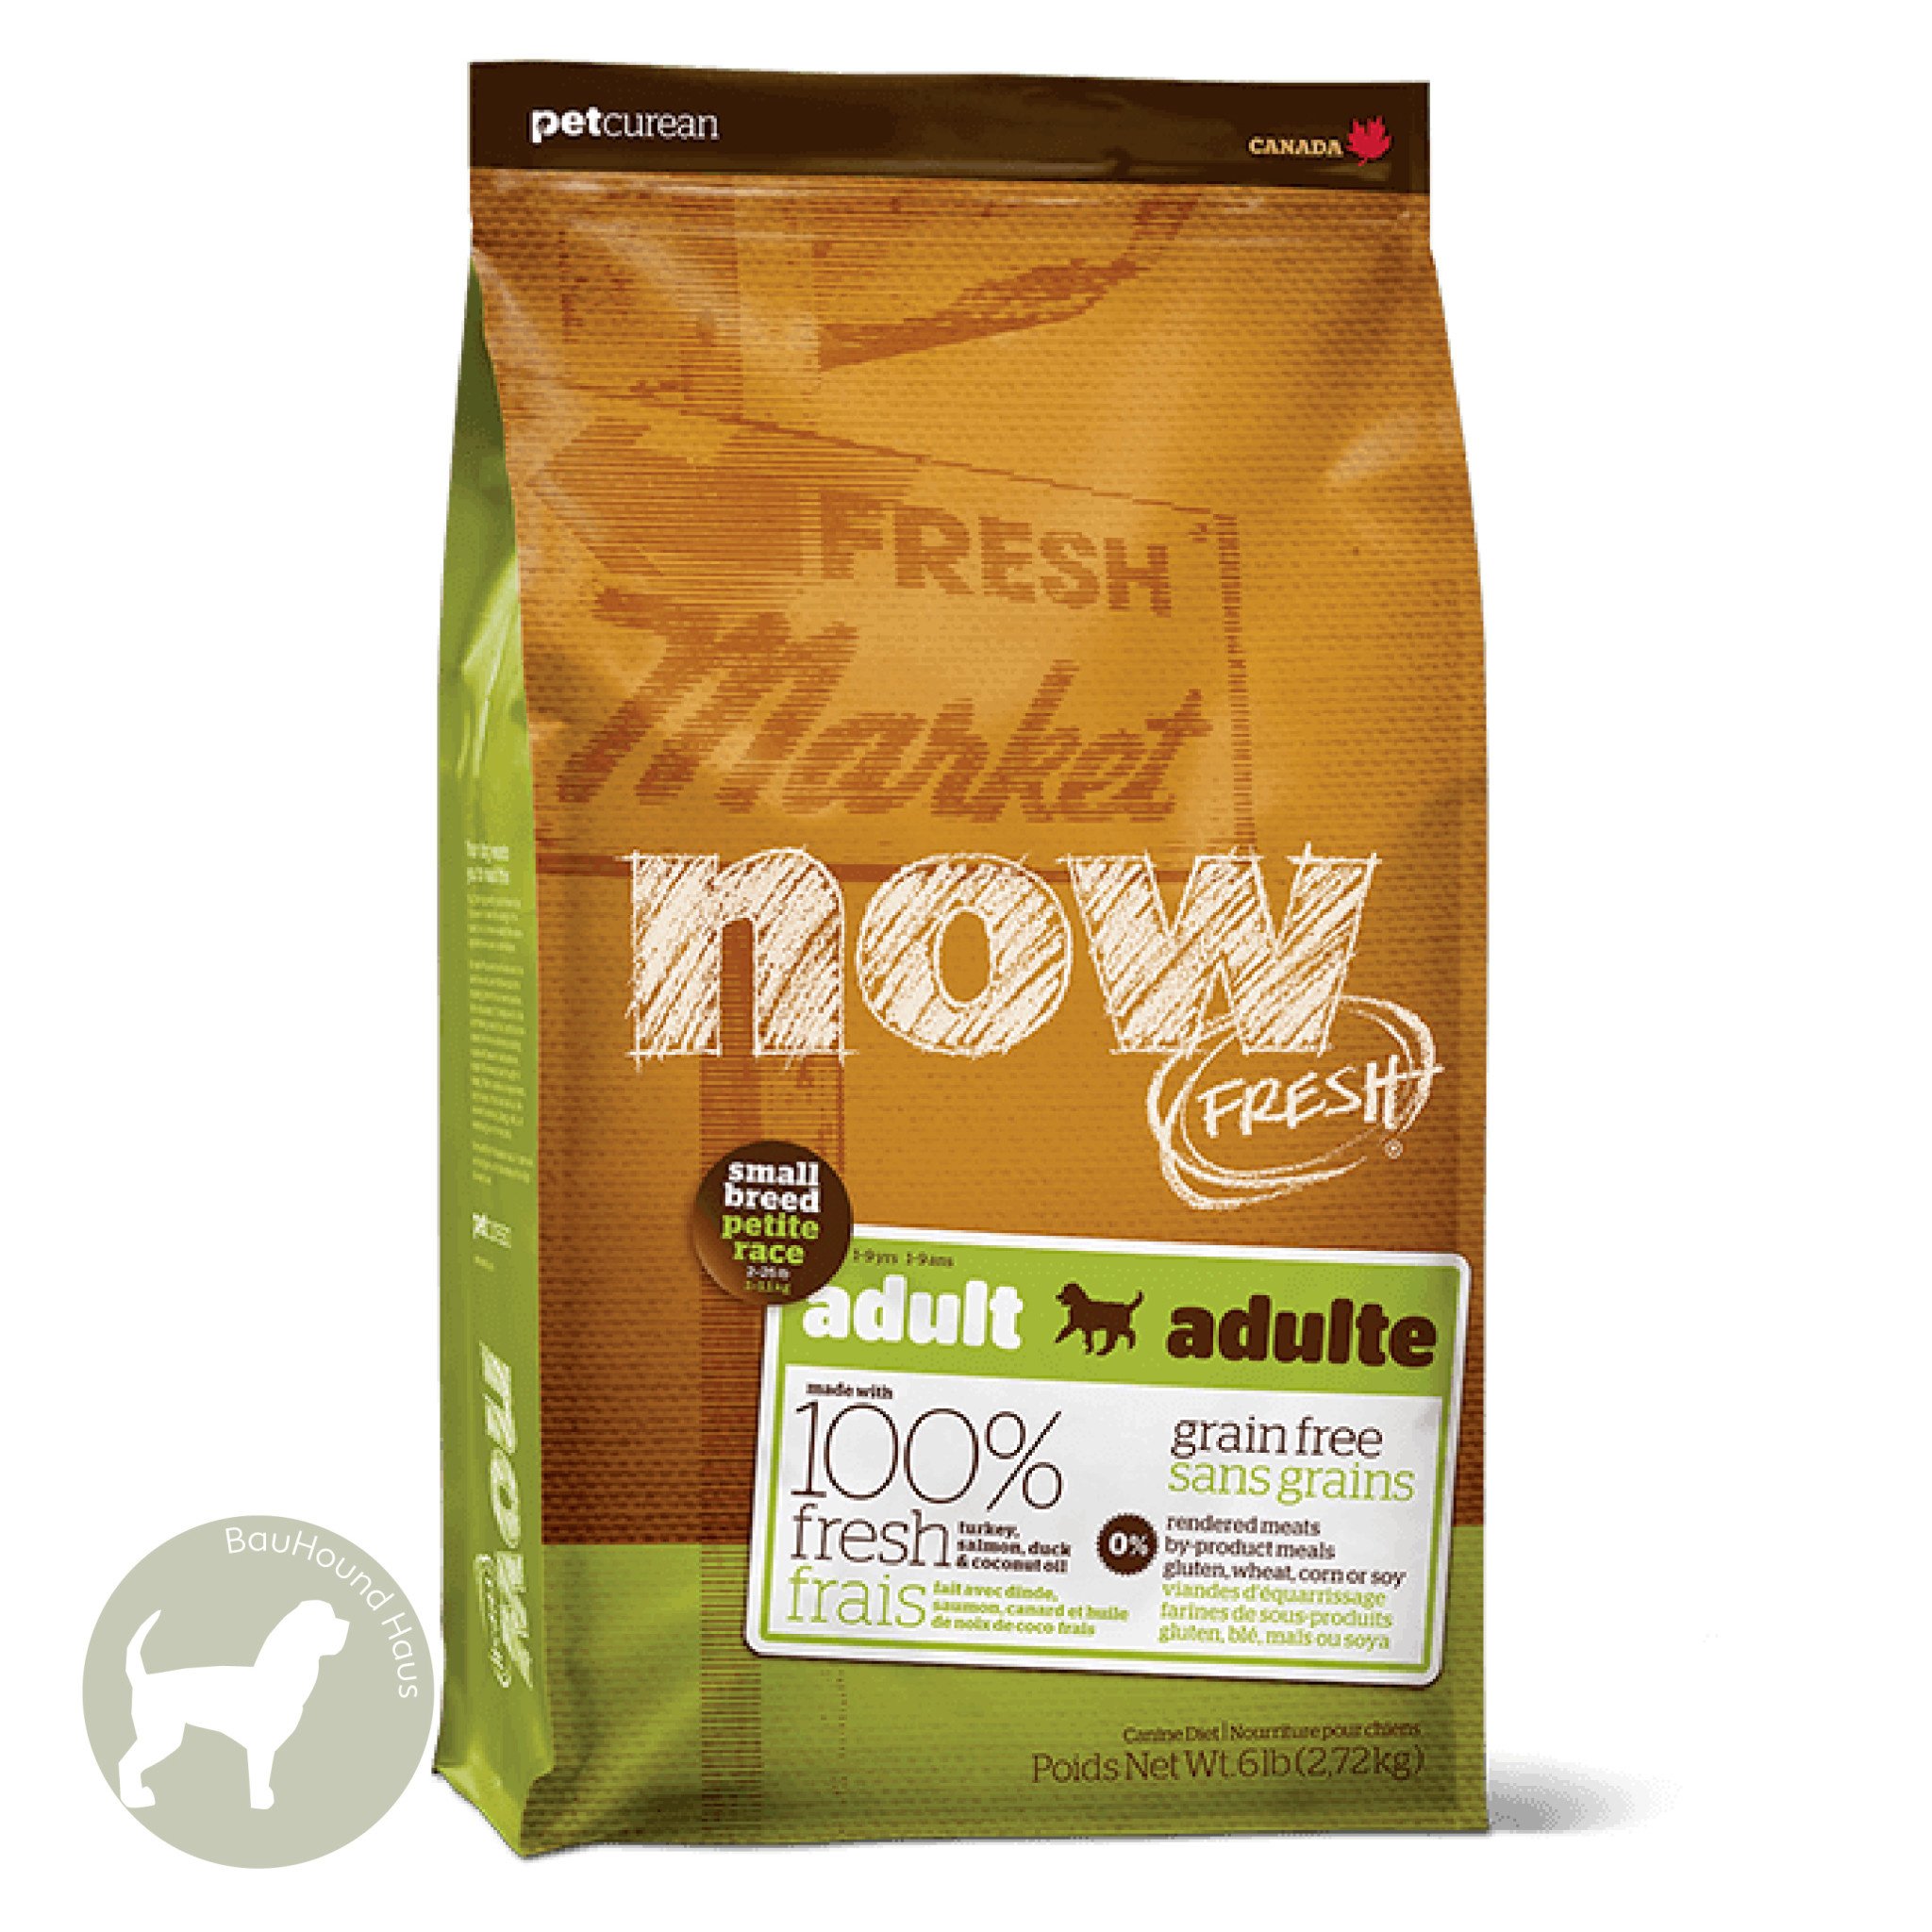 Now! Now! Fresh Small Breed Adult Kibble, 12lb